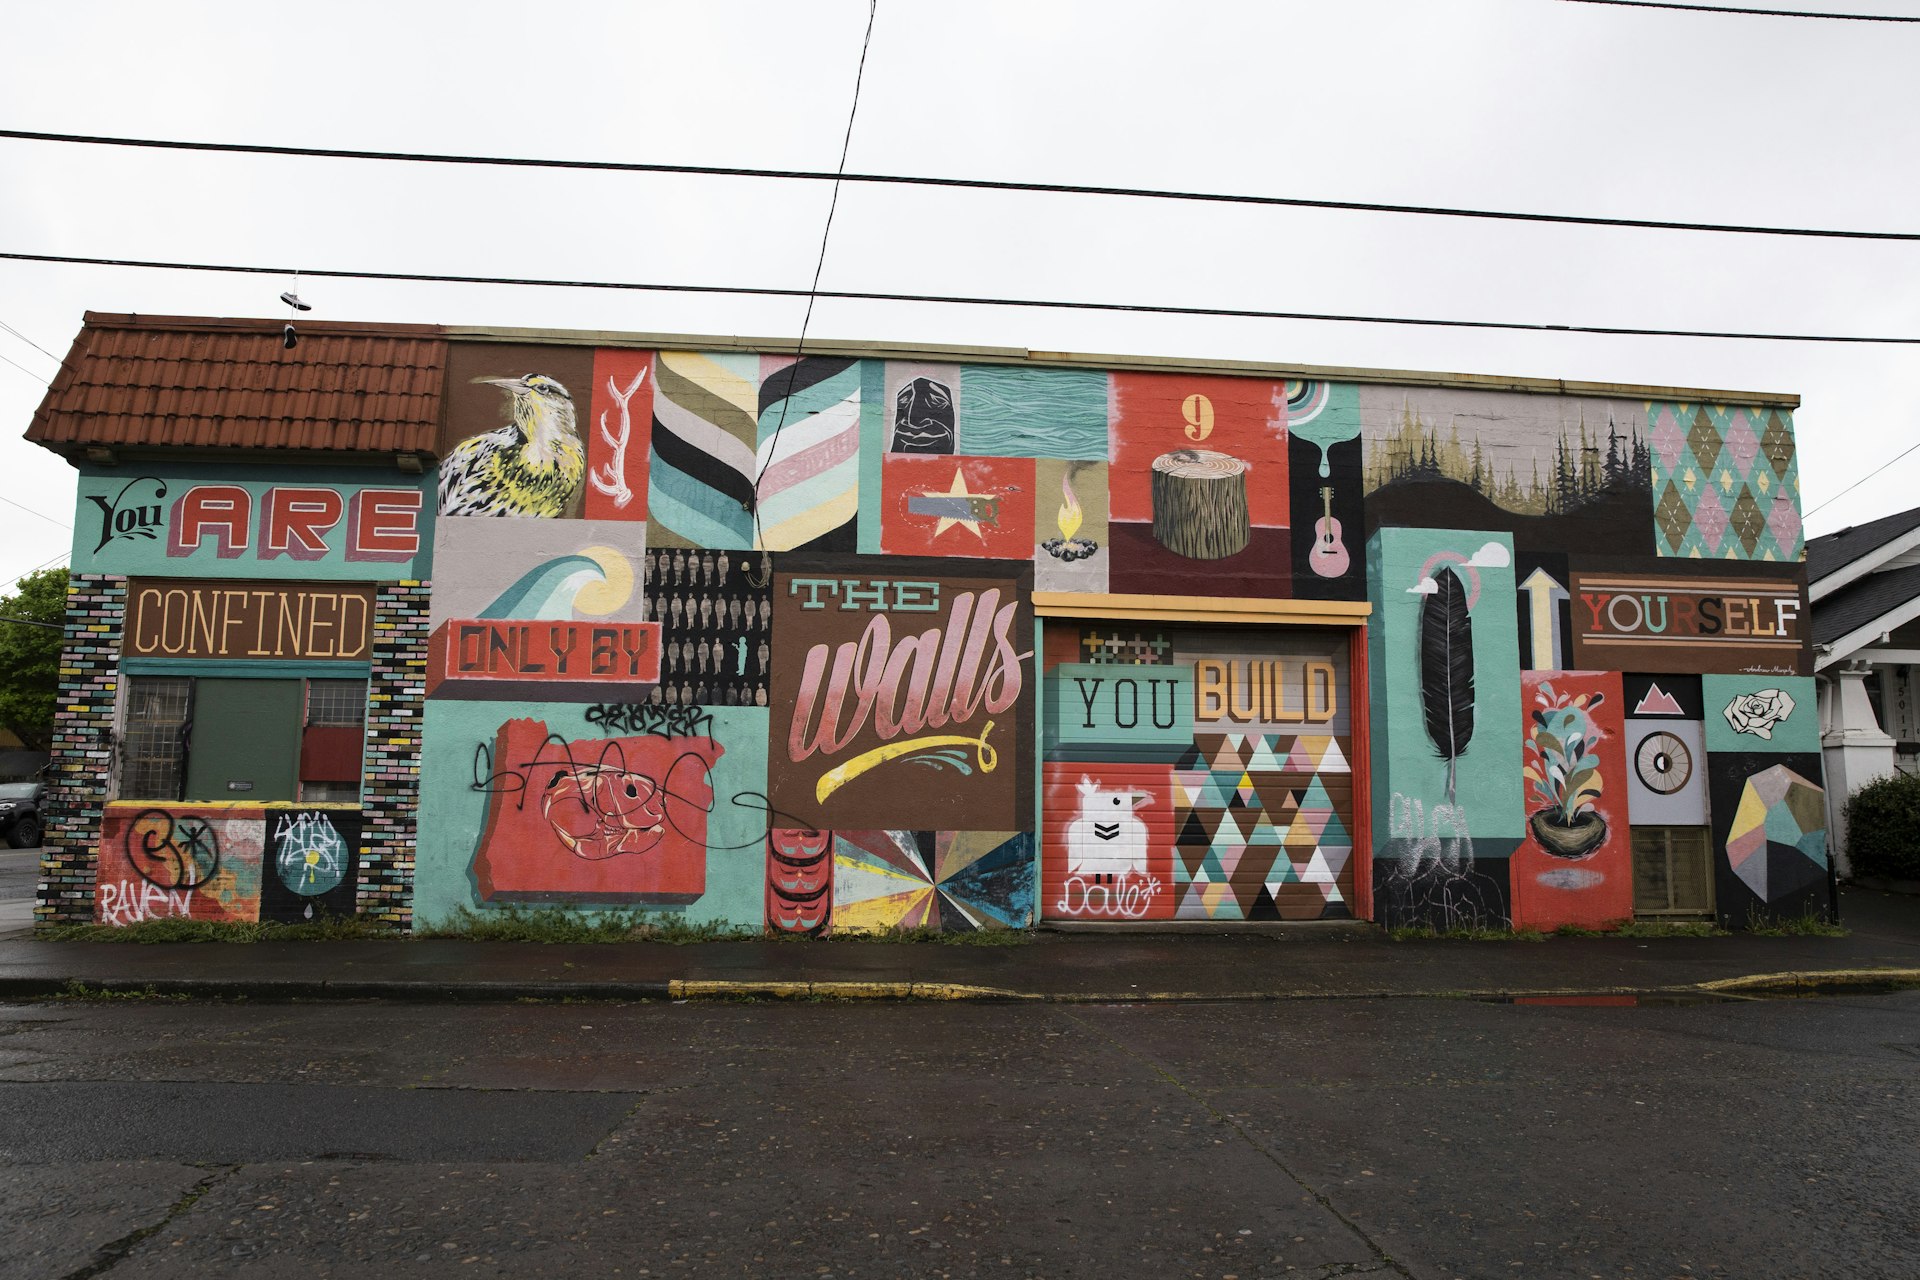 A mural is displayed on a wall in the Alberta Arts District of Portland, Oregon, U.S.